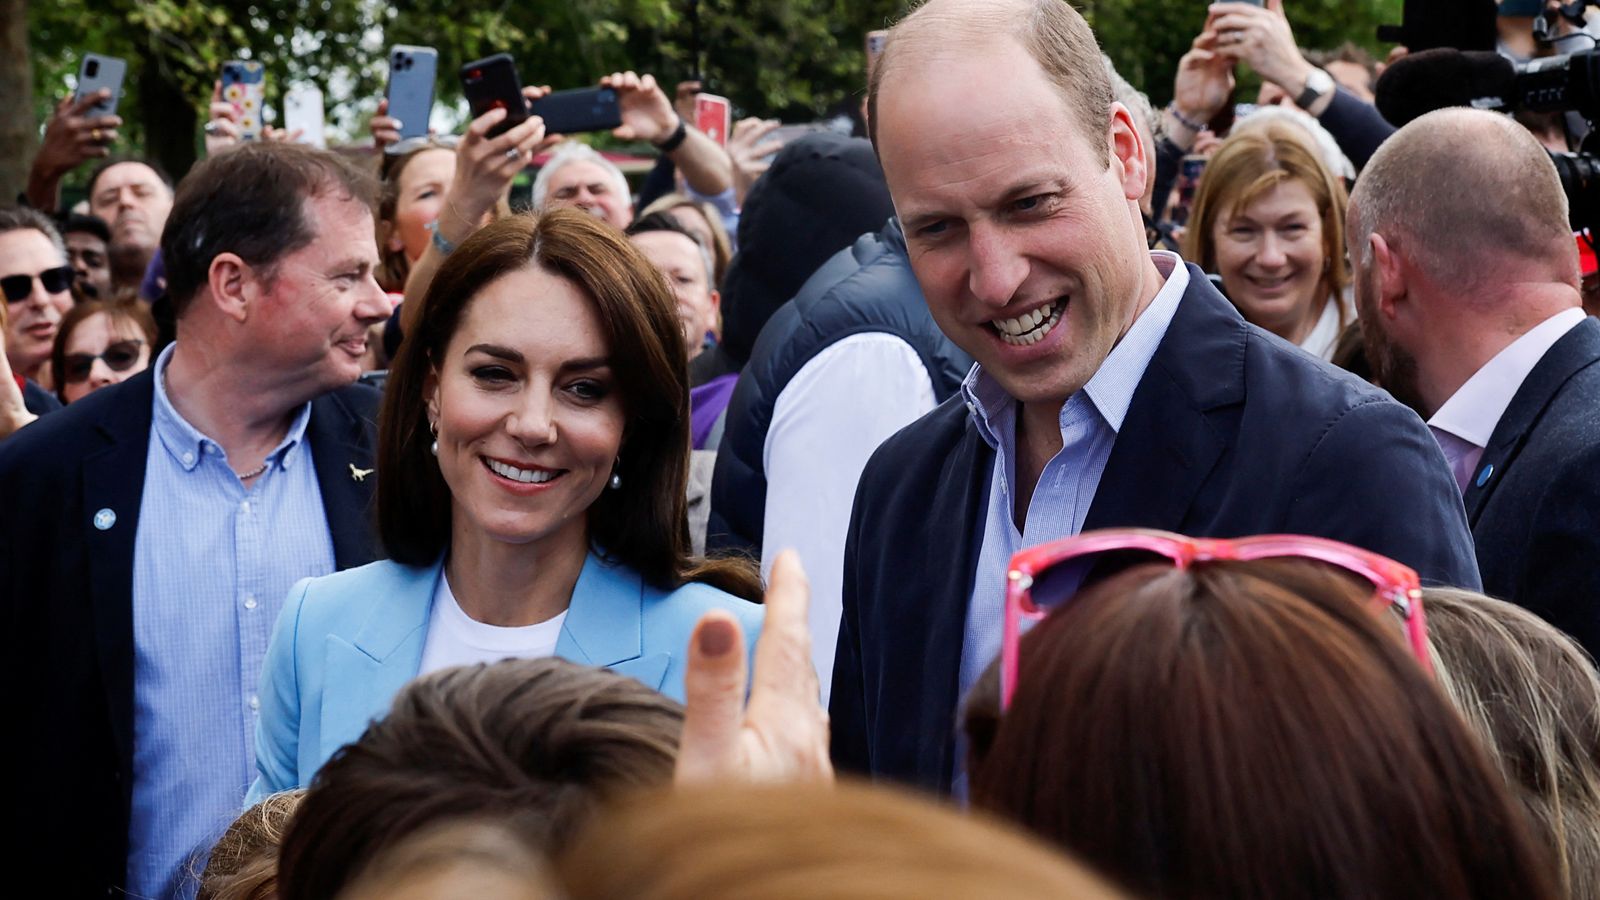 Prince William and Princess of Wales to meet volunteers as millions take part in Big Help Out event